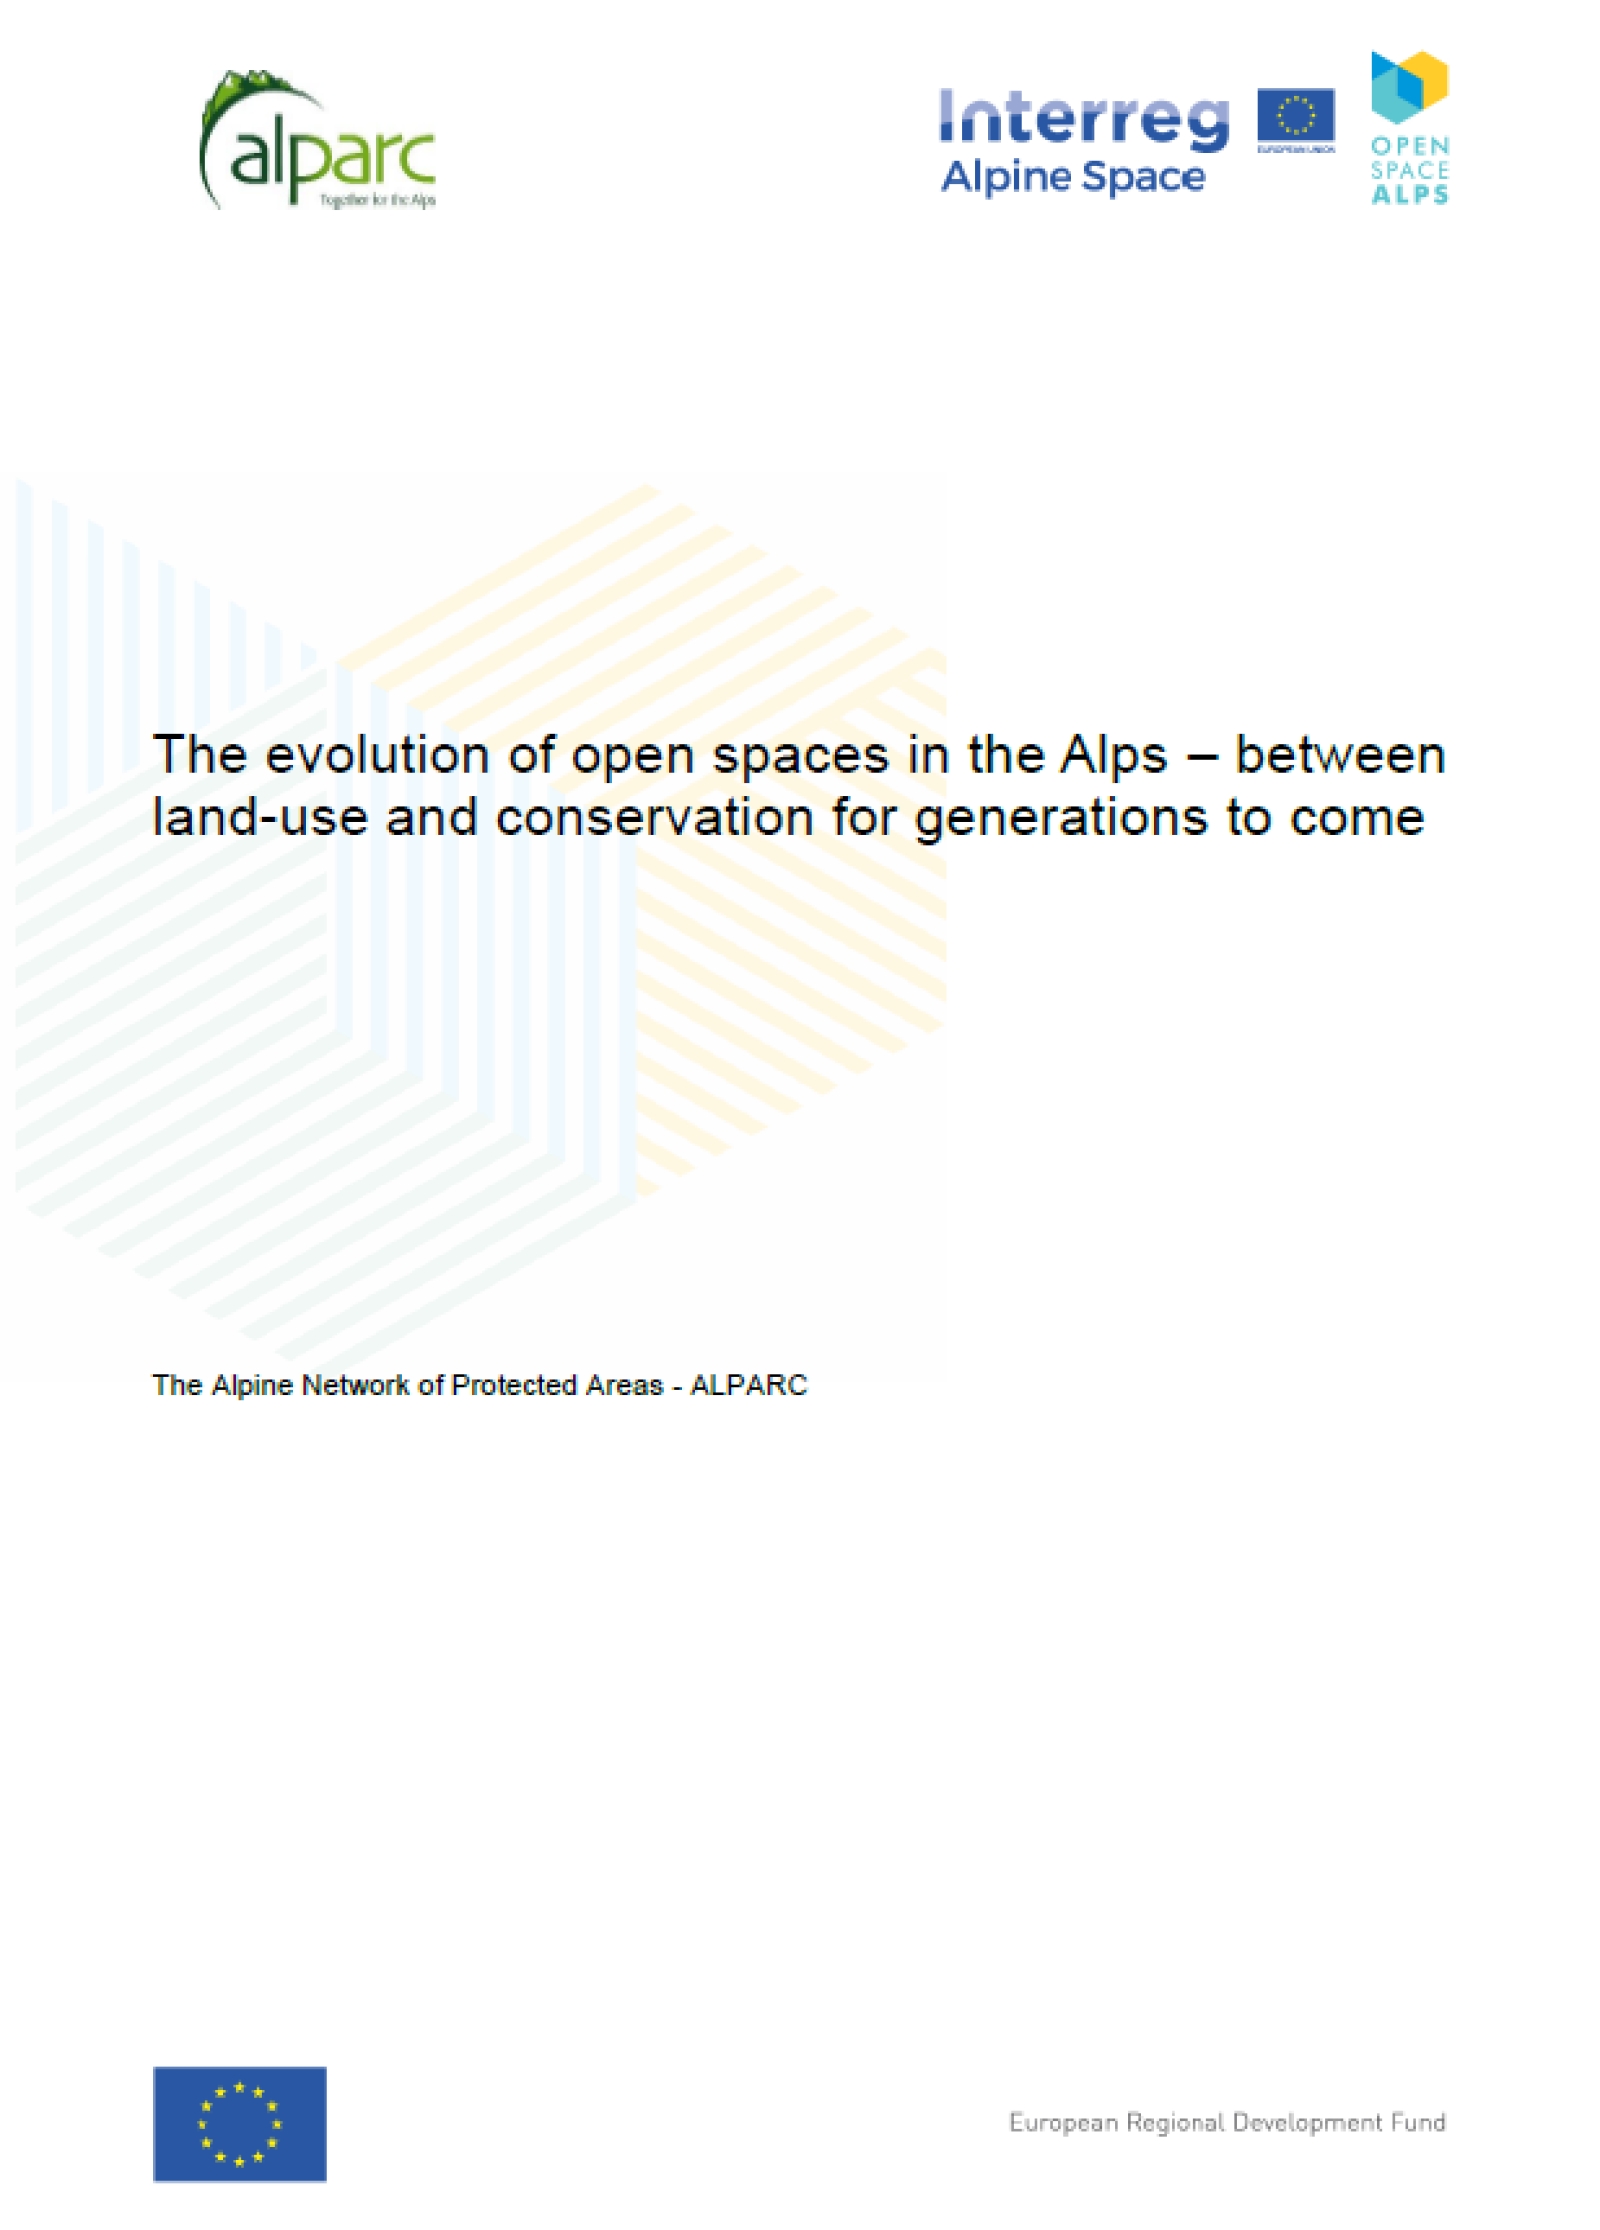 OpenSpaceAlps- Mapping report